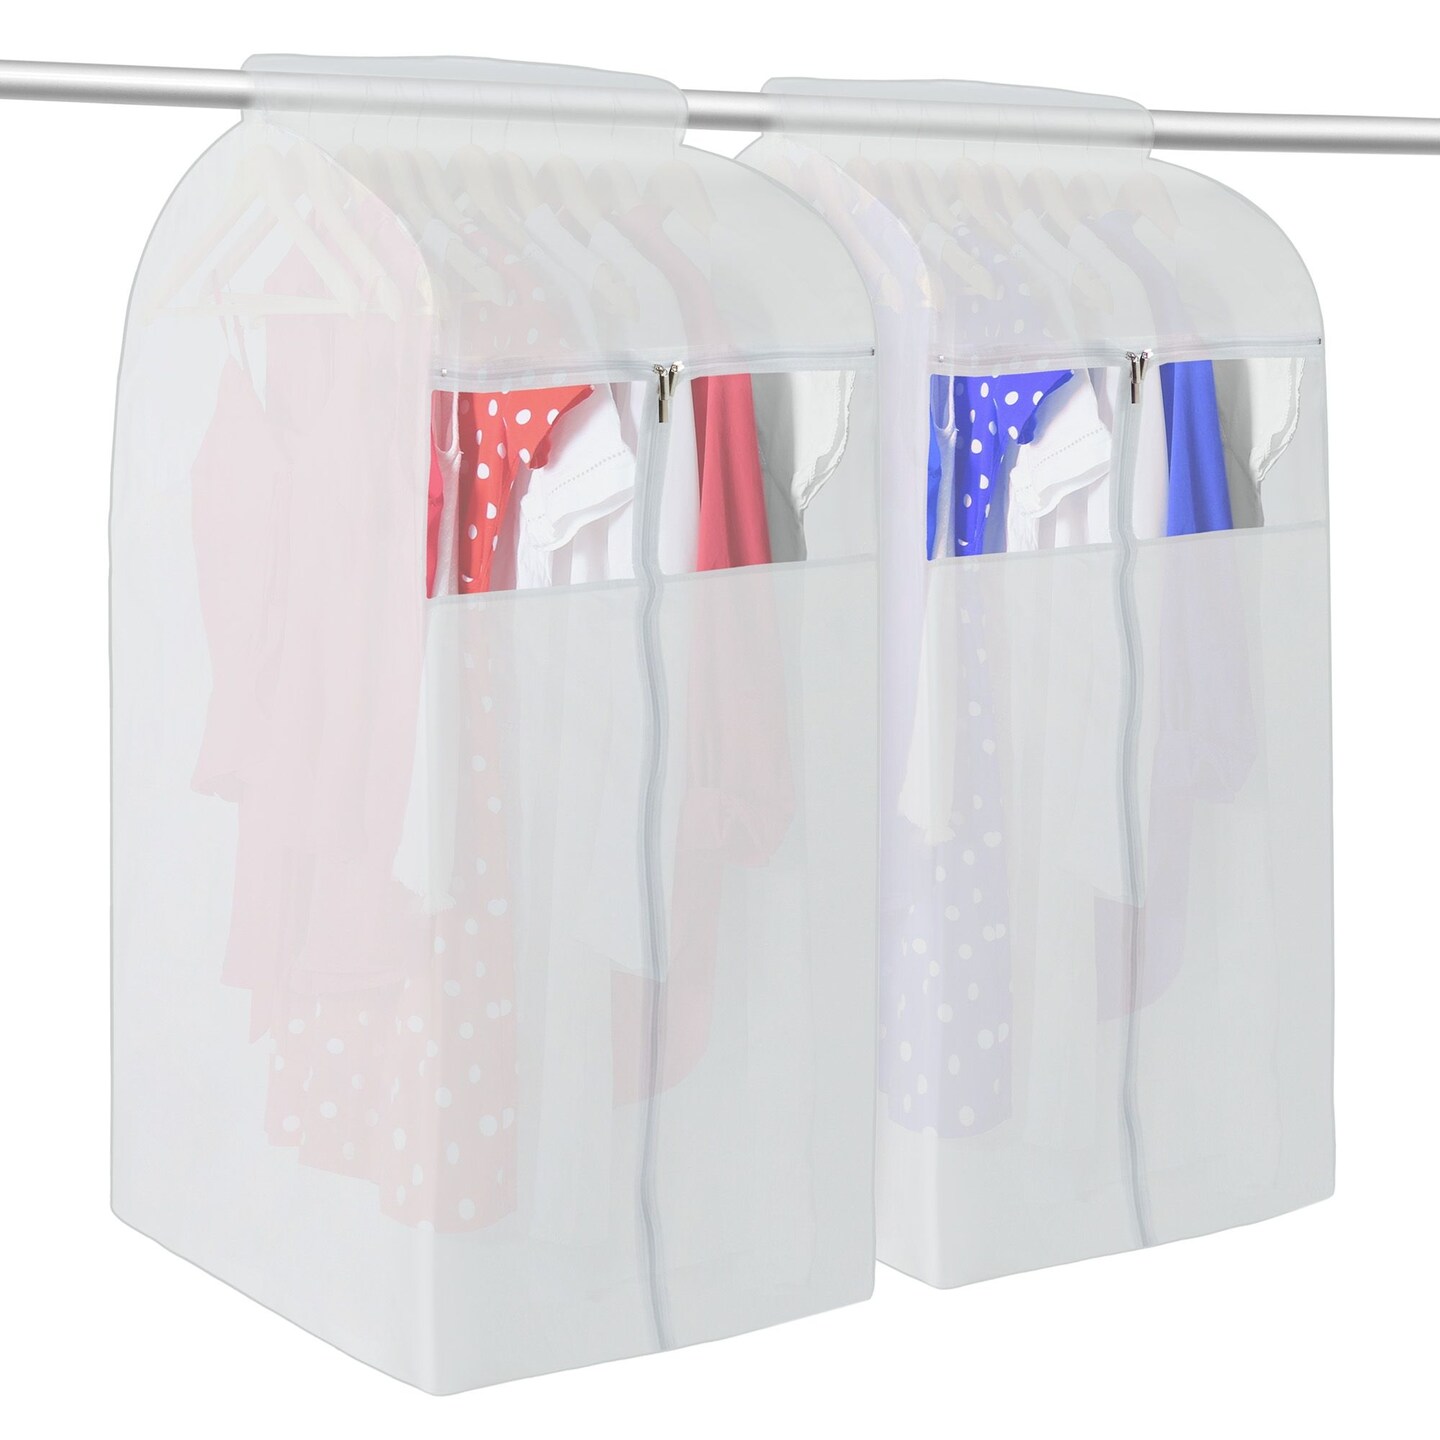 2 Pack Zippered Garment Bags for Hanging Clothes, White Dry Cleaning Bags for Closet Storage (20 x 24 x 54 In)